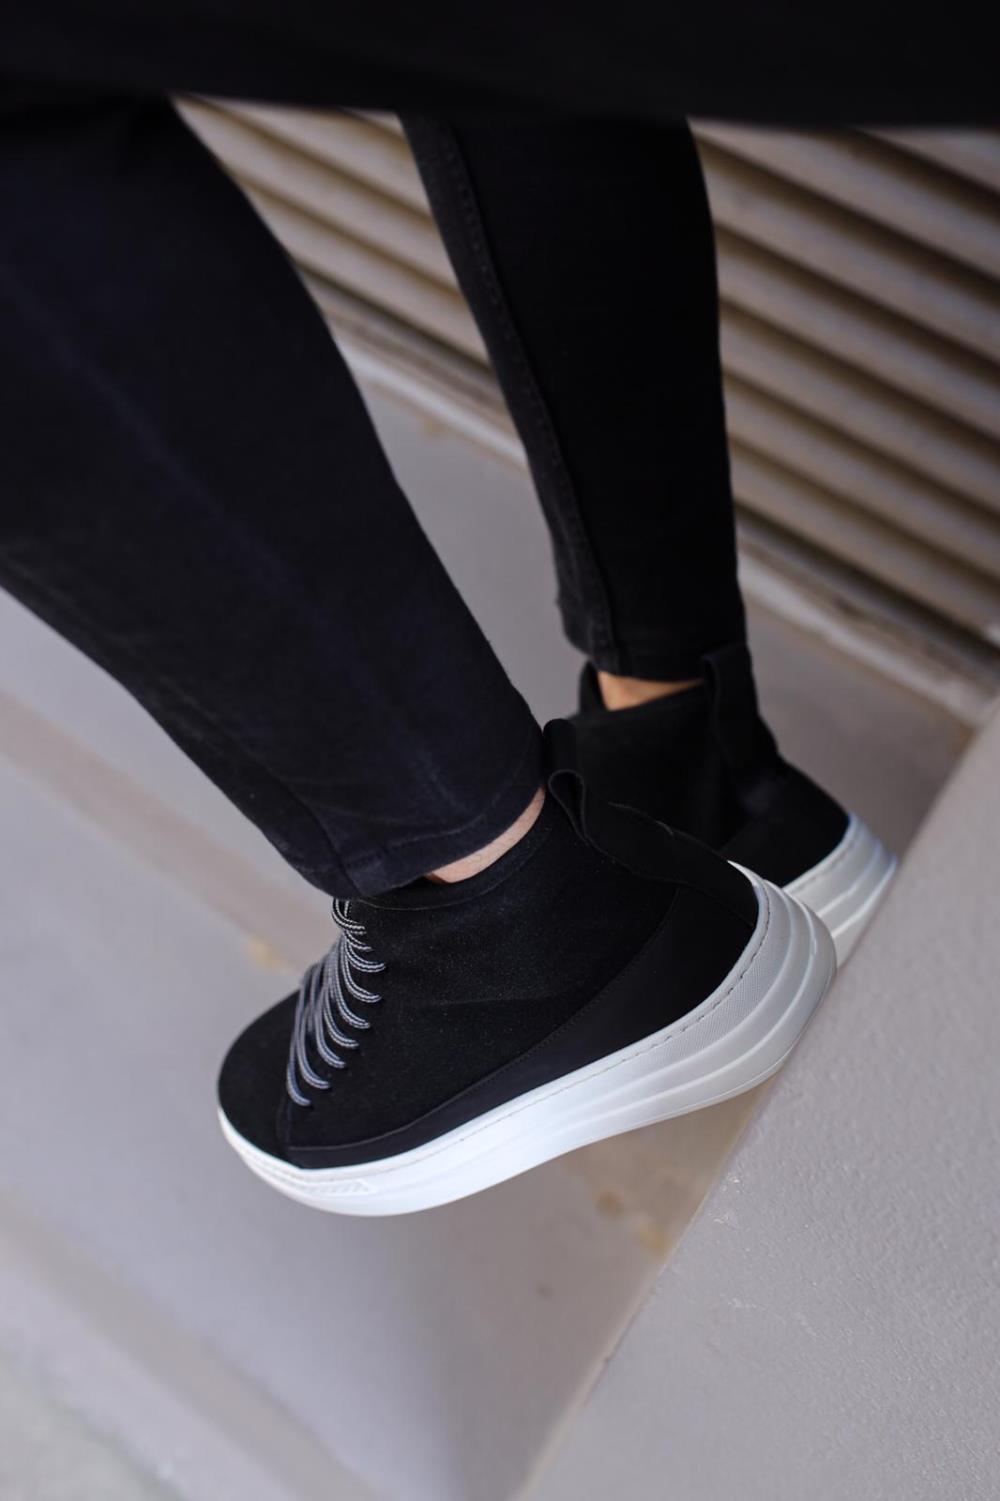 High Sole Shoes C-030 Black Suede (White Sole) - STREET MODE ™